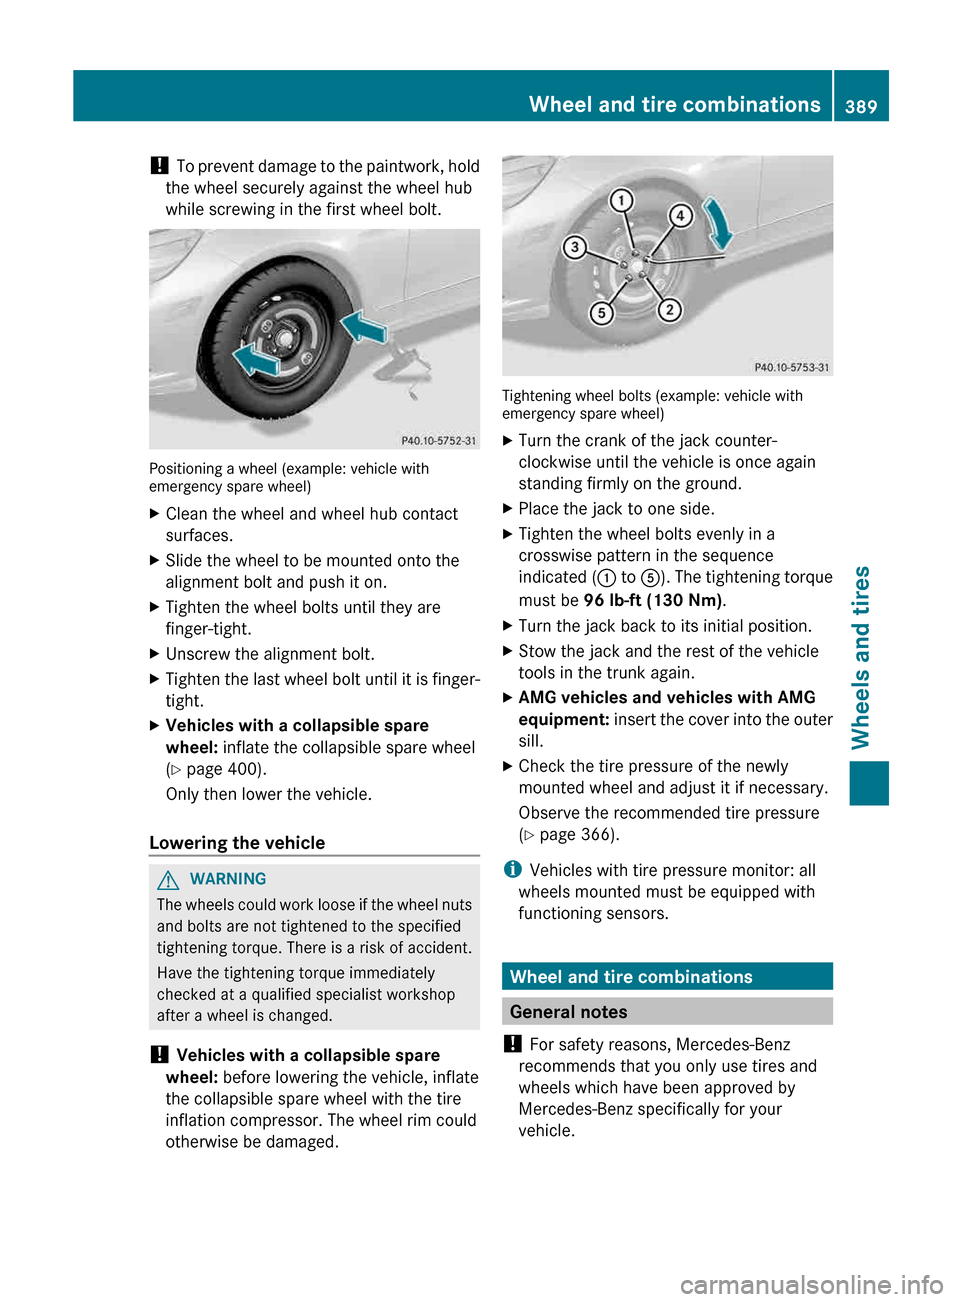 MERCEDES-BENZ E-Class WAGON 2013 W212 Owners Manual ! 
To  prevent damage to the paintwork, hold
the wheel securely against the wheel hub
while screwing in the first wheel bolt. Positioning a wheel (example: vehicle with
emergency spare wheel)
X
Clean 